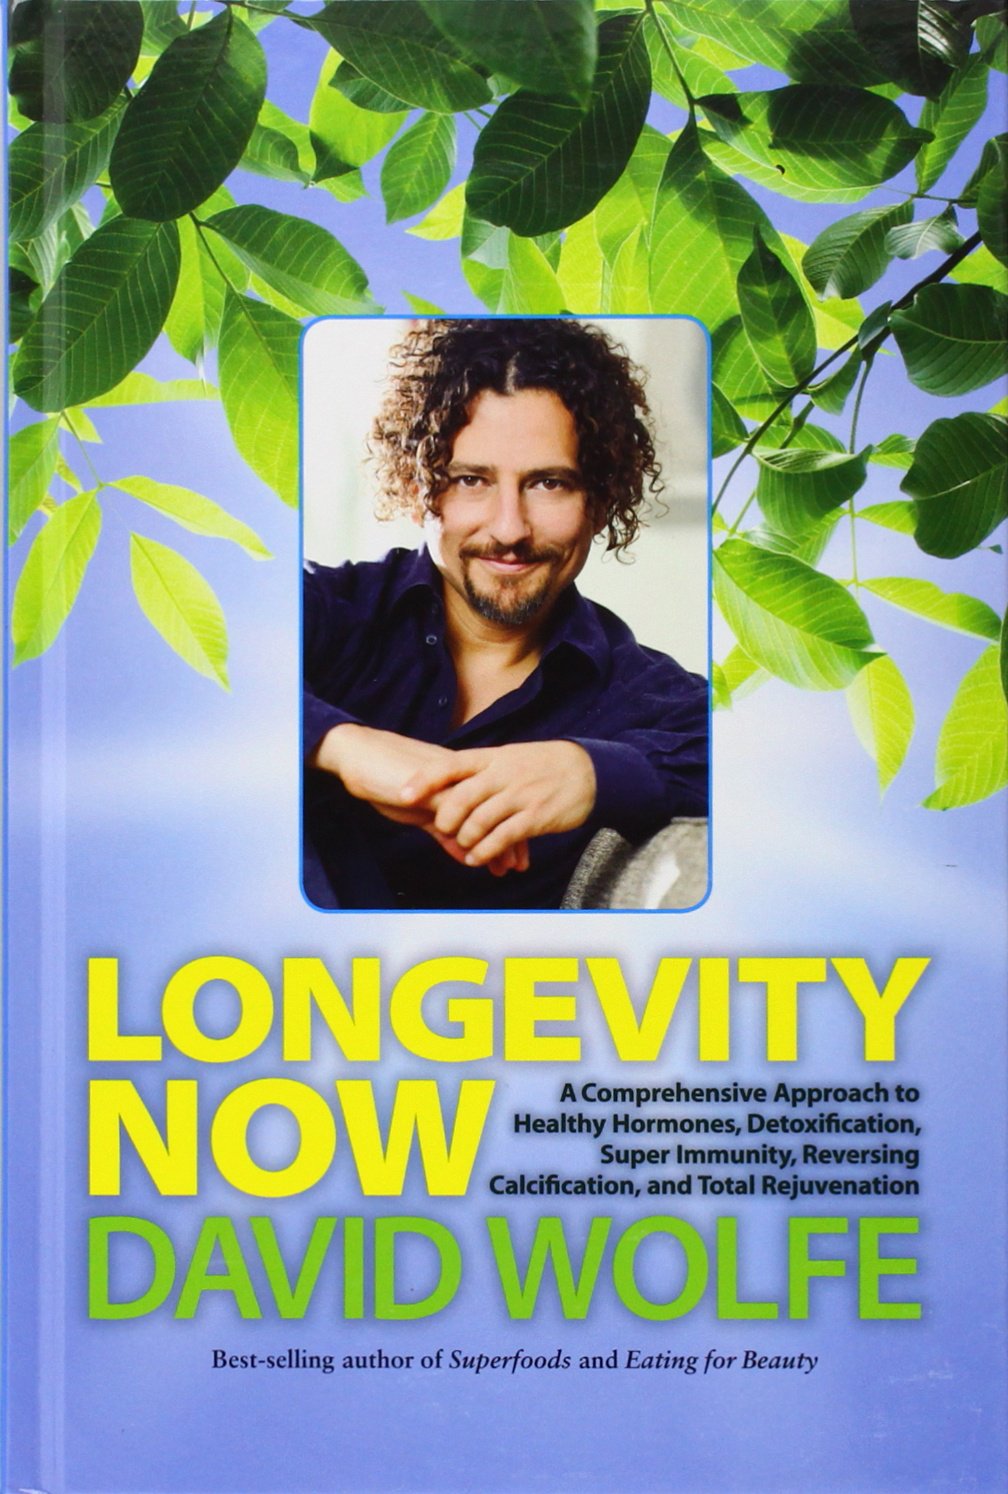 Longevity NOW | David Wolfe | Raw Living UK | Books | Longevity Now: A Comprehensive Approach to Healthy Hormones, Detoxification, Super Immunity, Reversing Calcification, and Total Rejuvenation by David Wolfe.